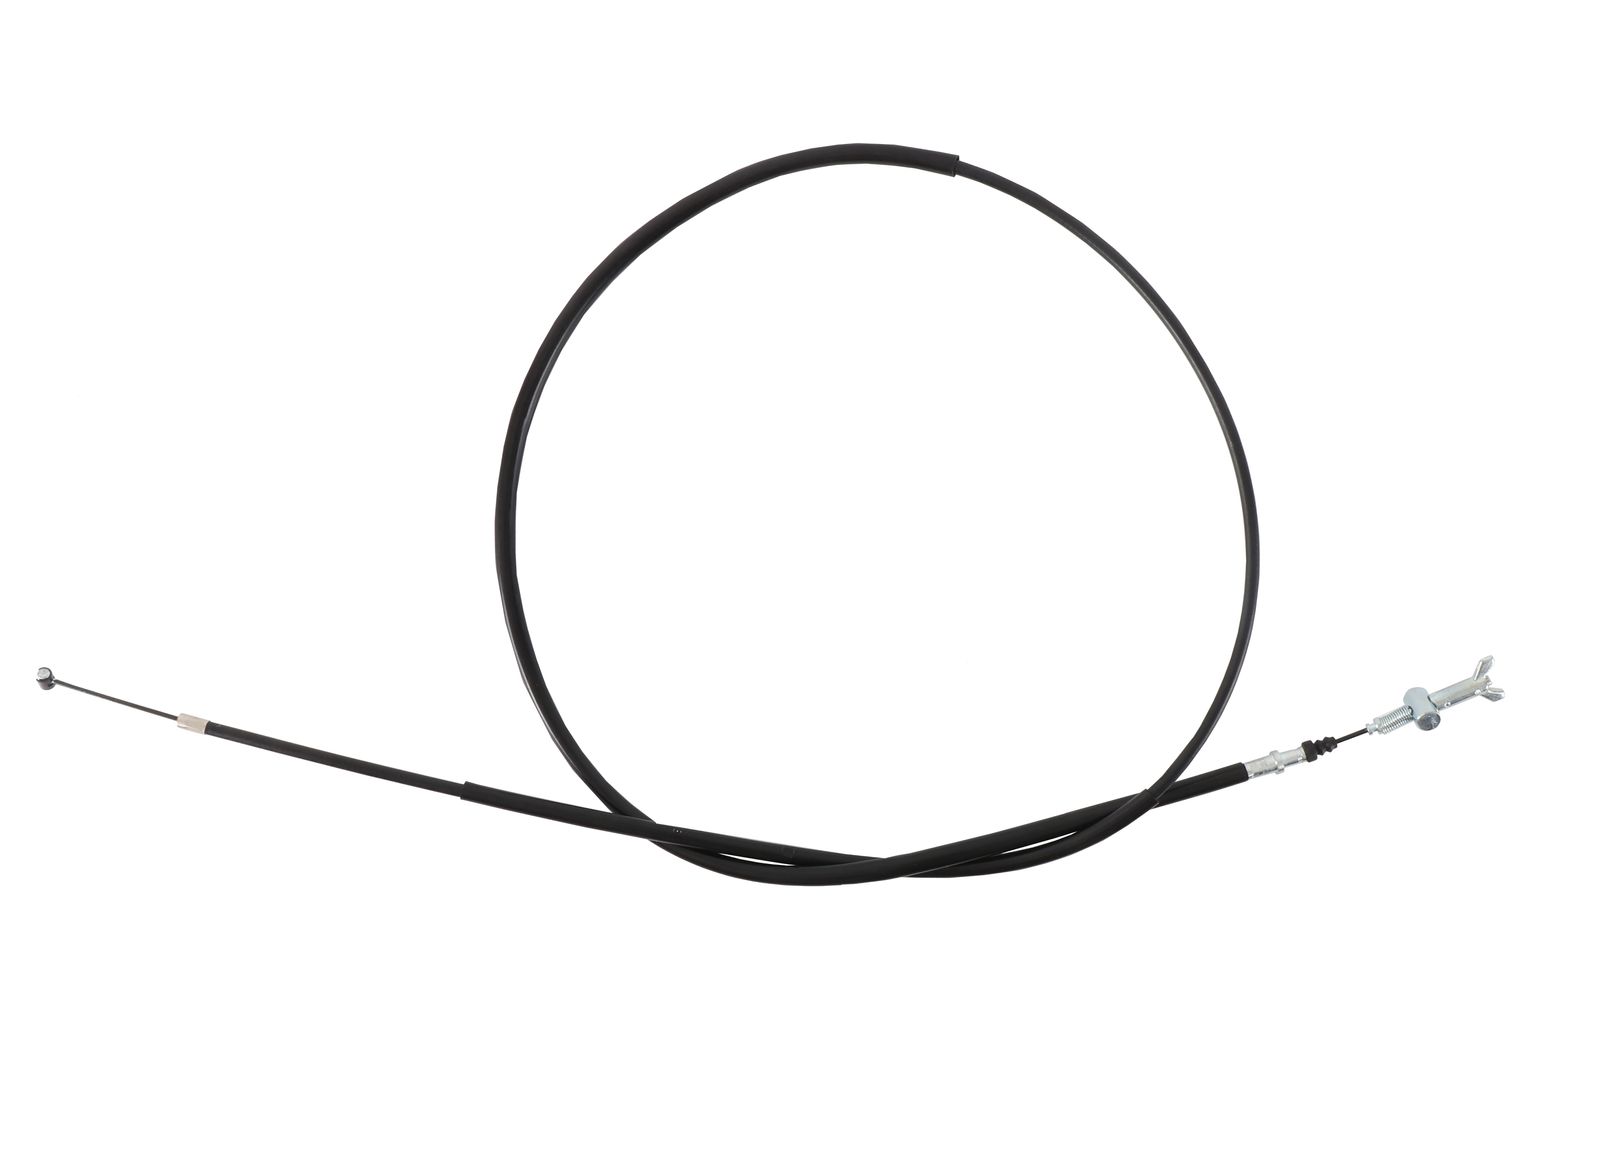 Wrp Brake Cables - WRP454057 image